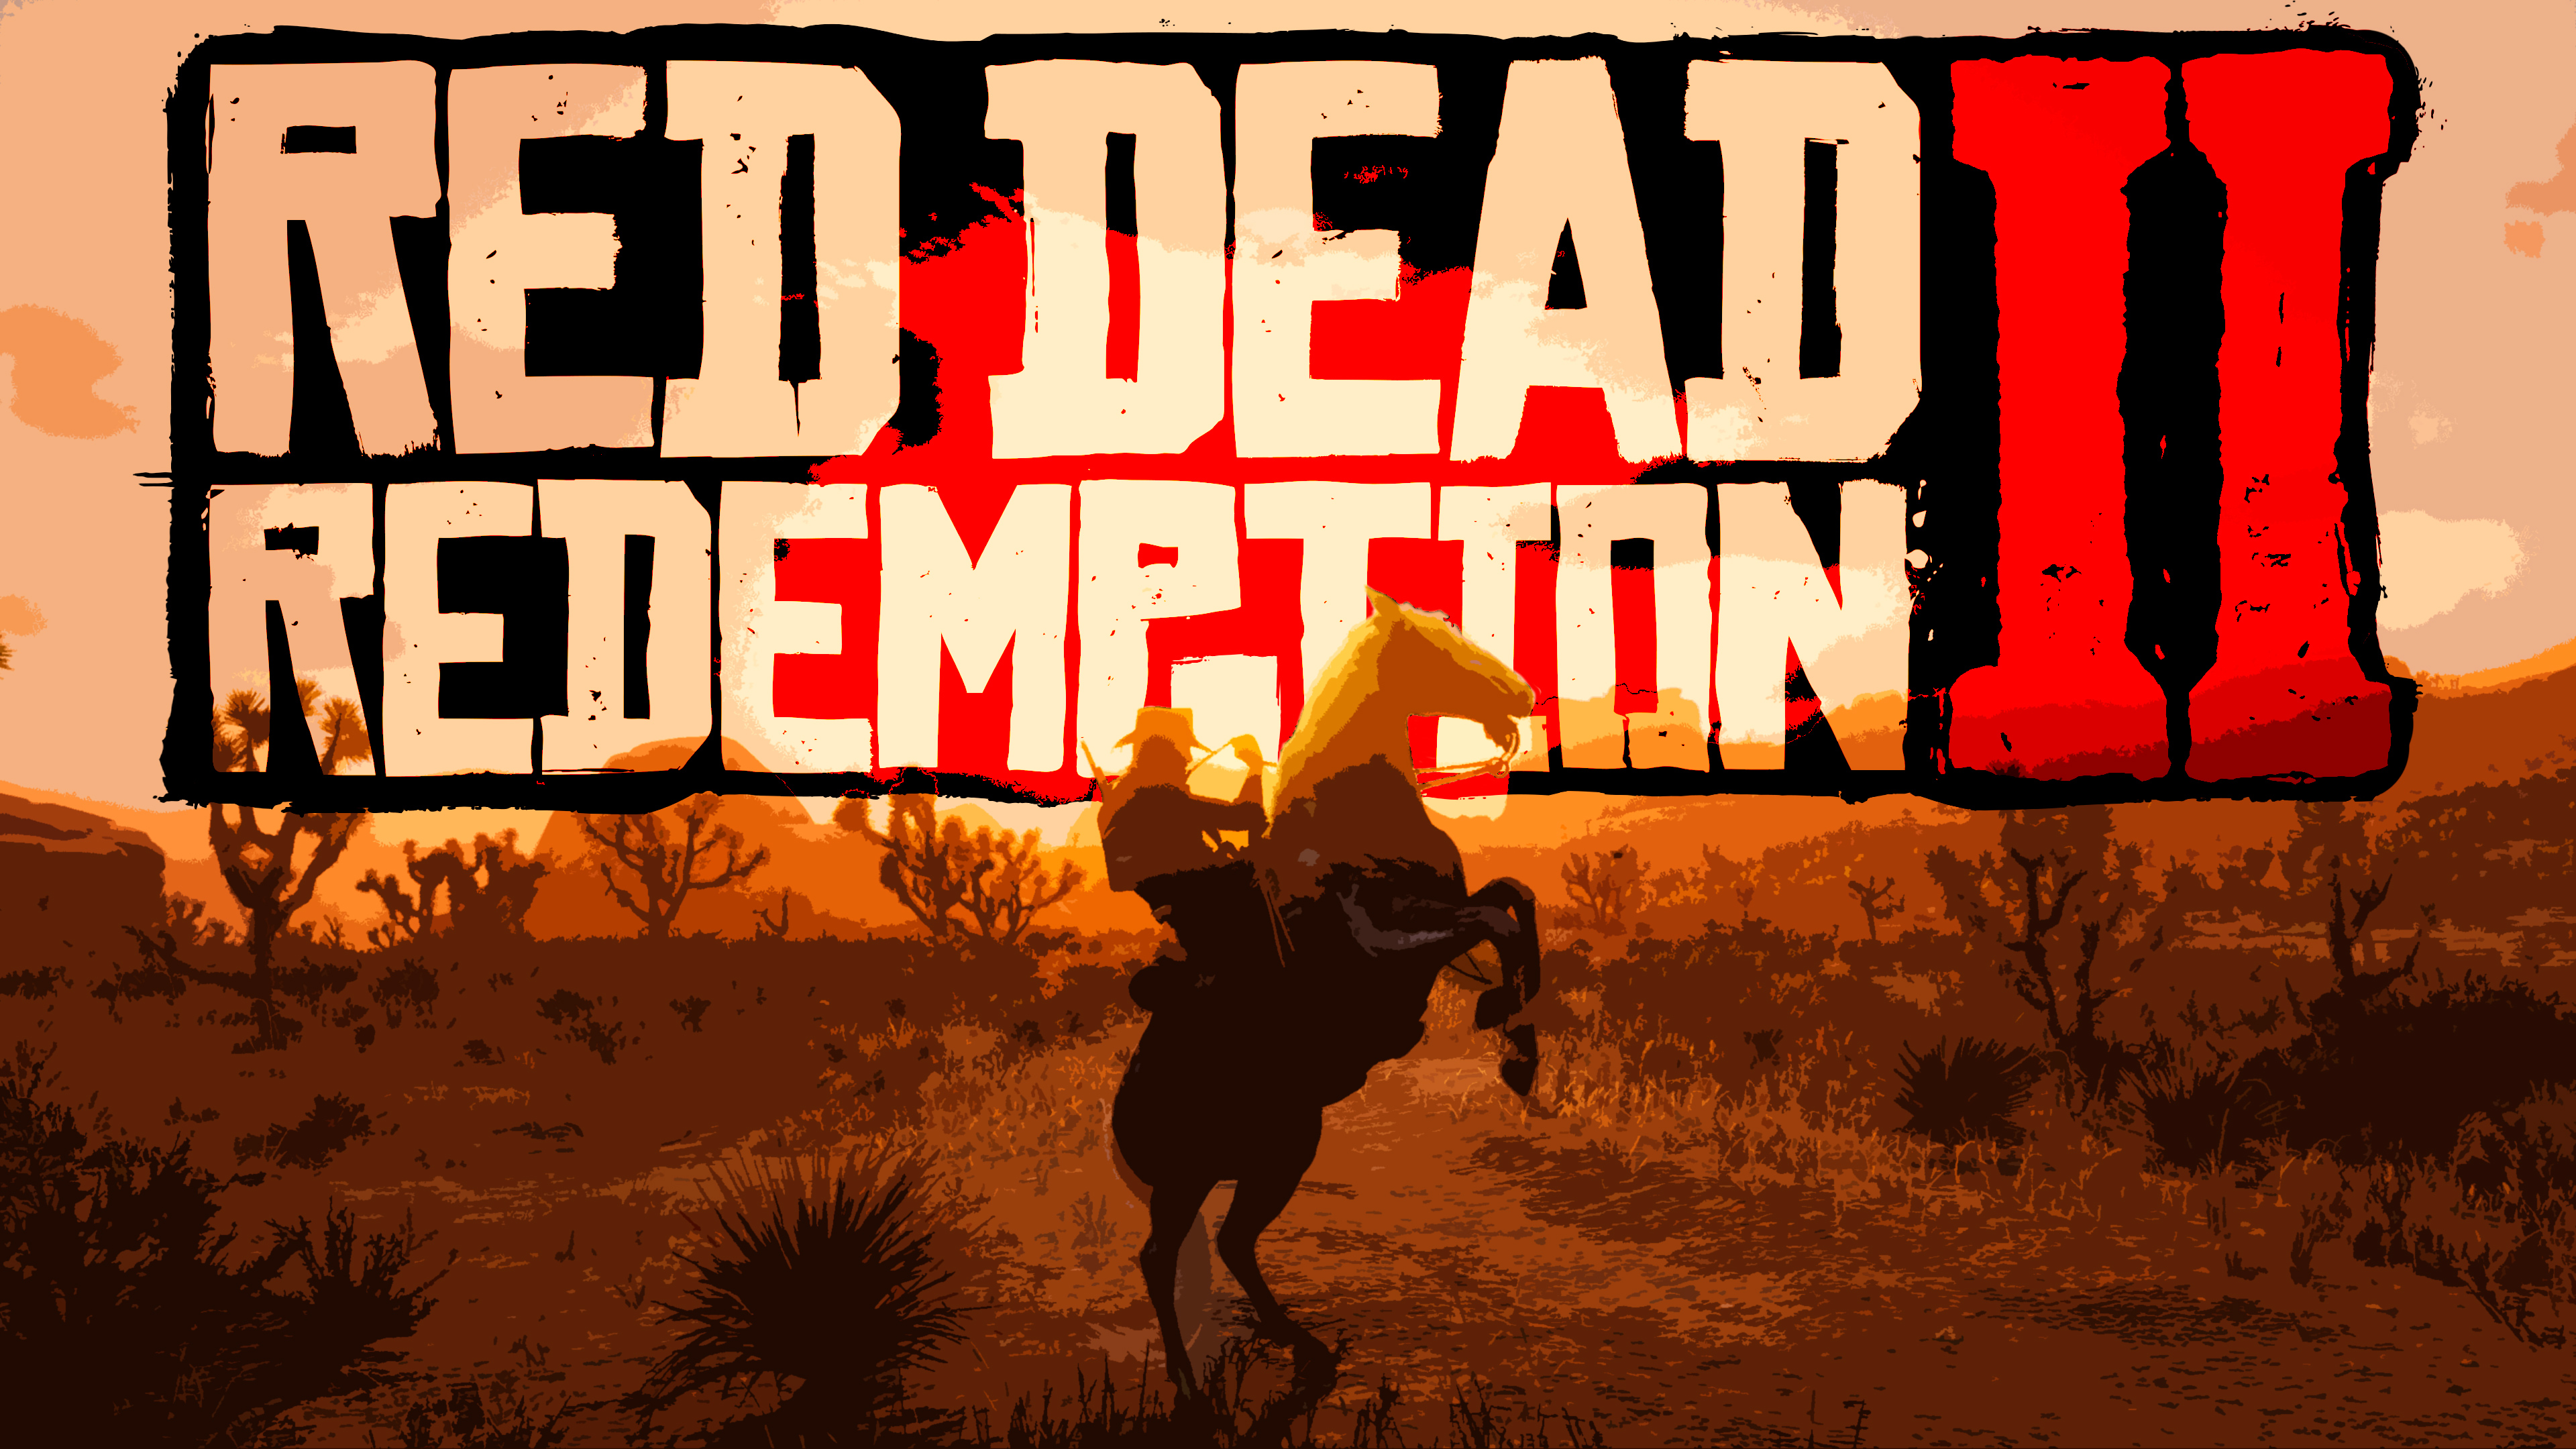 Video Game Red Dead Redemption 2 4k Ultra HD Wallpaper by NoviKaiba23